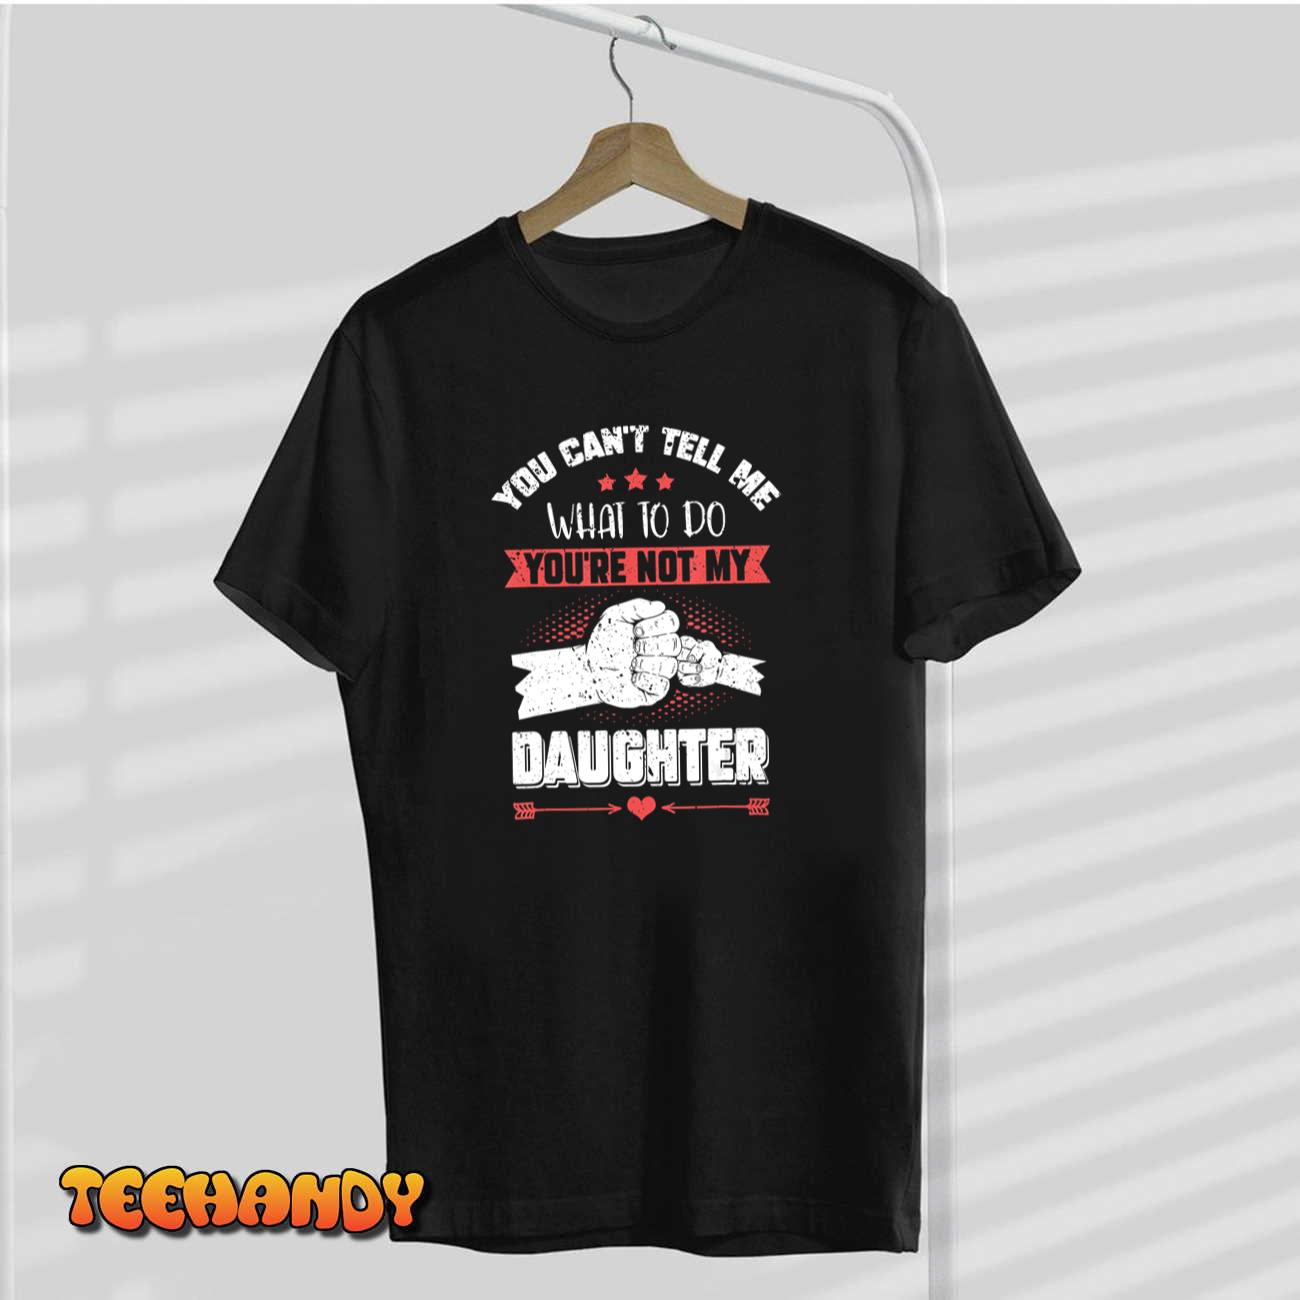 You can’t Tell me what to do not my Daughter – Father’s Day T-Shirt